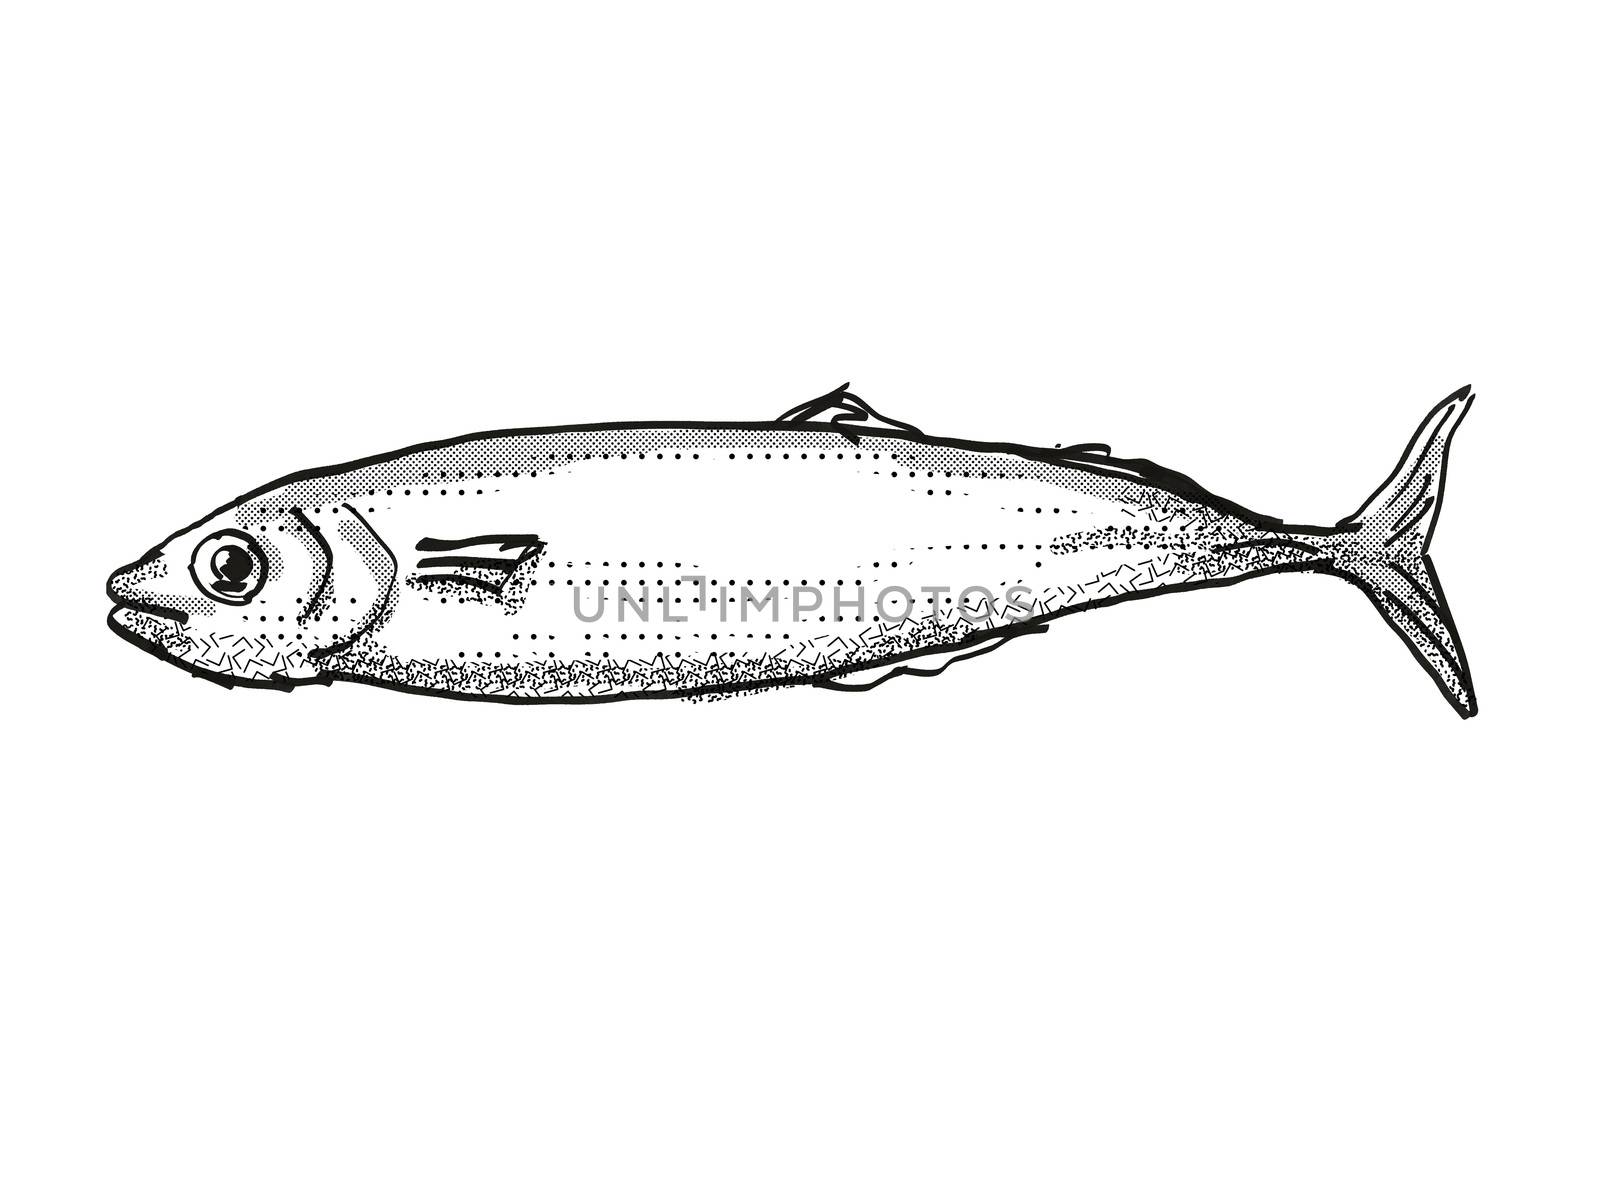 Retro cartoon style drawing of a Koheru, a native New Zealand marine life species viewed from side on isolated white background done in black and white